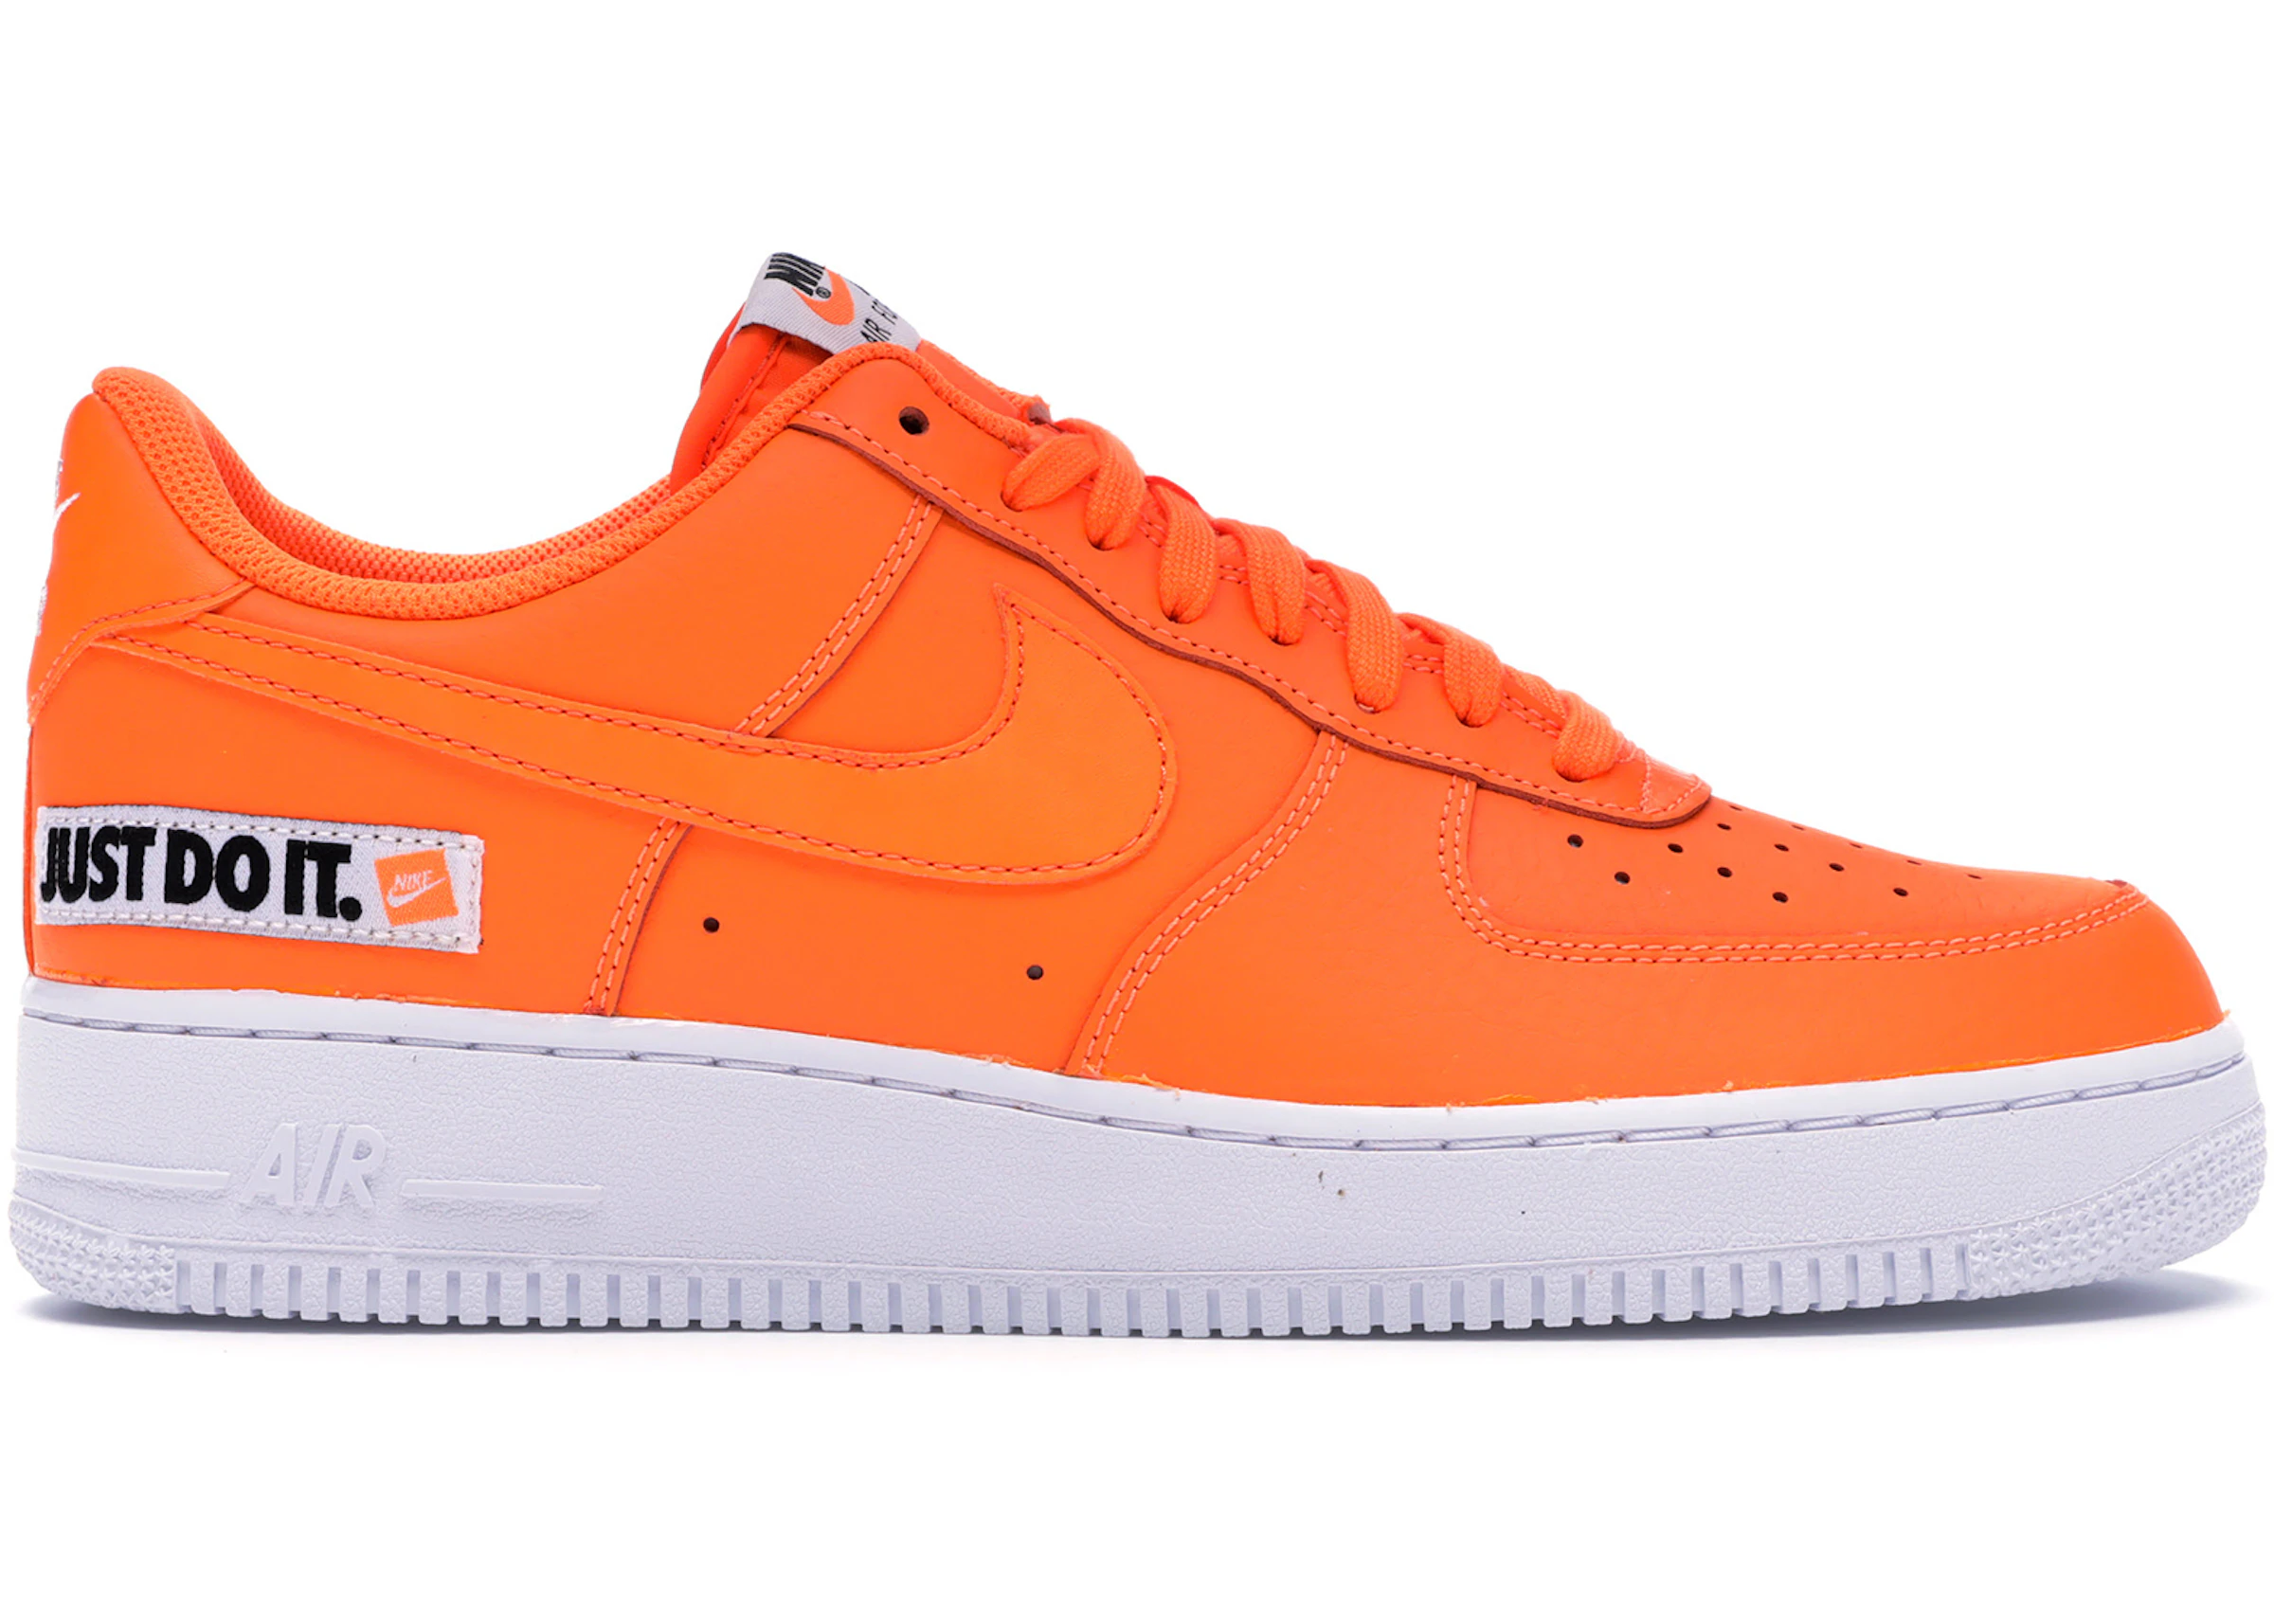 Intrusion Array of Dedicate Nike Air Force 1 Low Just Do It Pack Orange - AO6296-800/BQ5360-800 - US